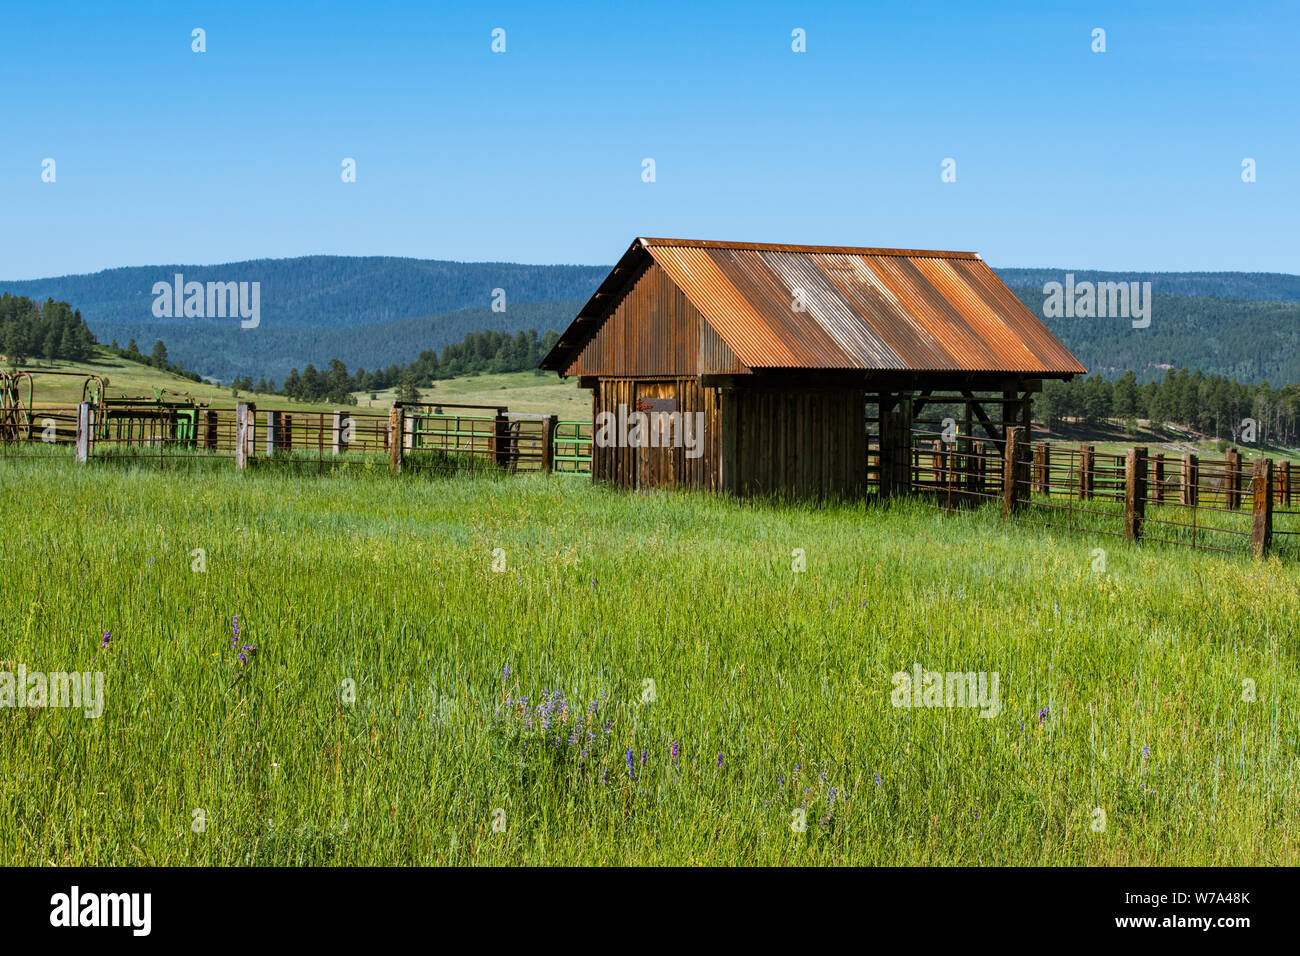 An old weathered barn with a rusty corrugated metal roof in a grassy field on a ranch in Pagosa Springs, Colorado Stock Photo